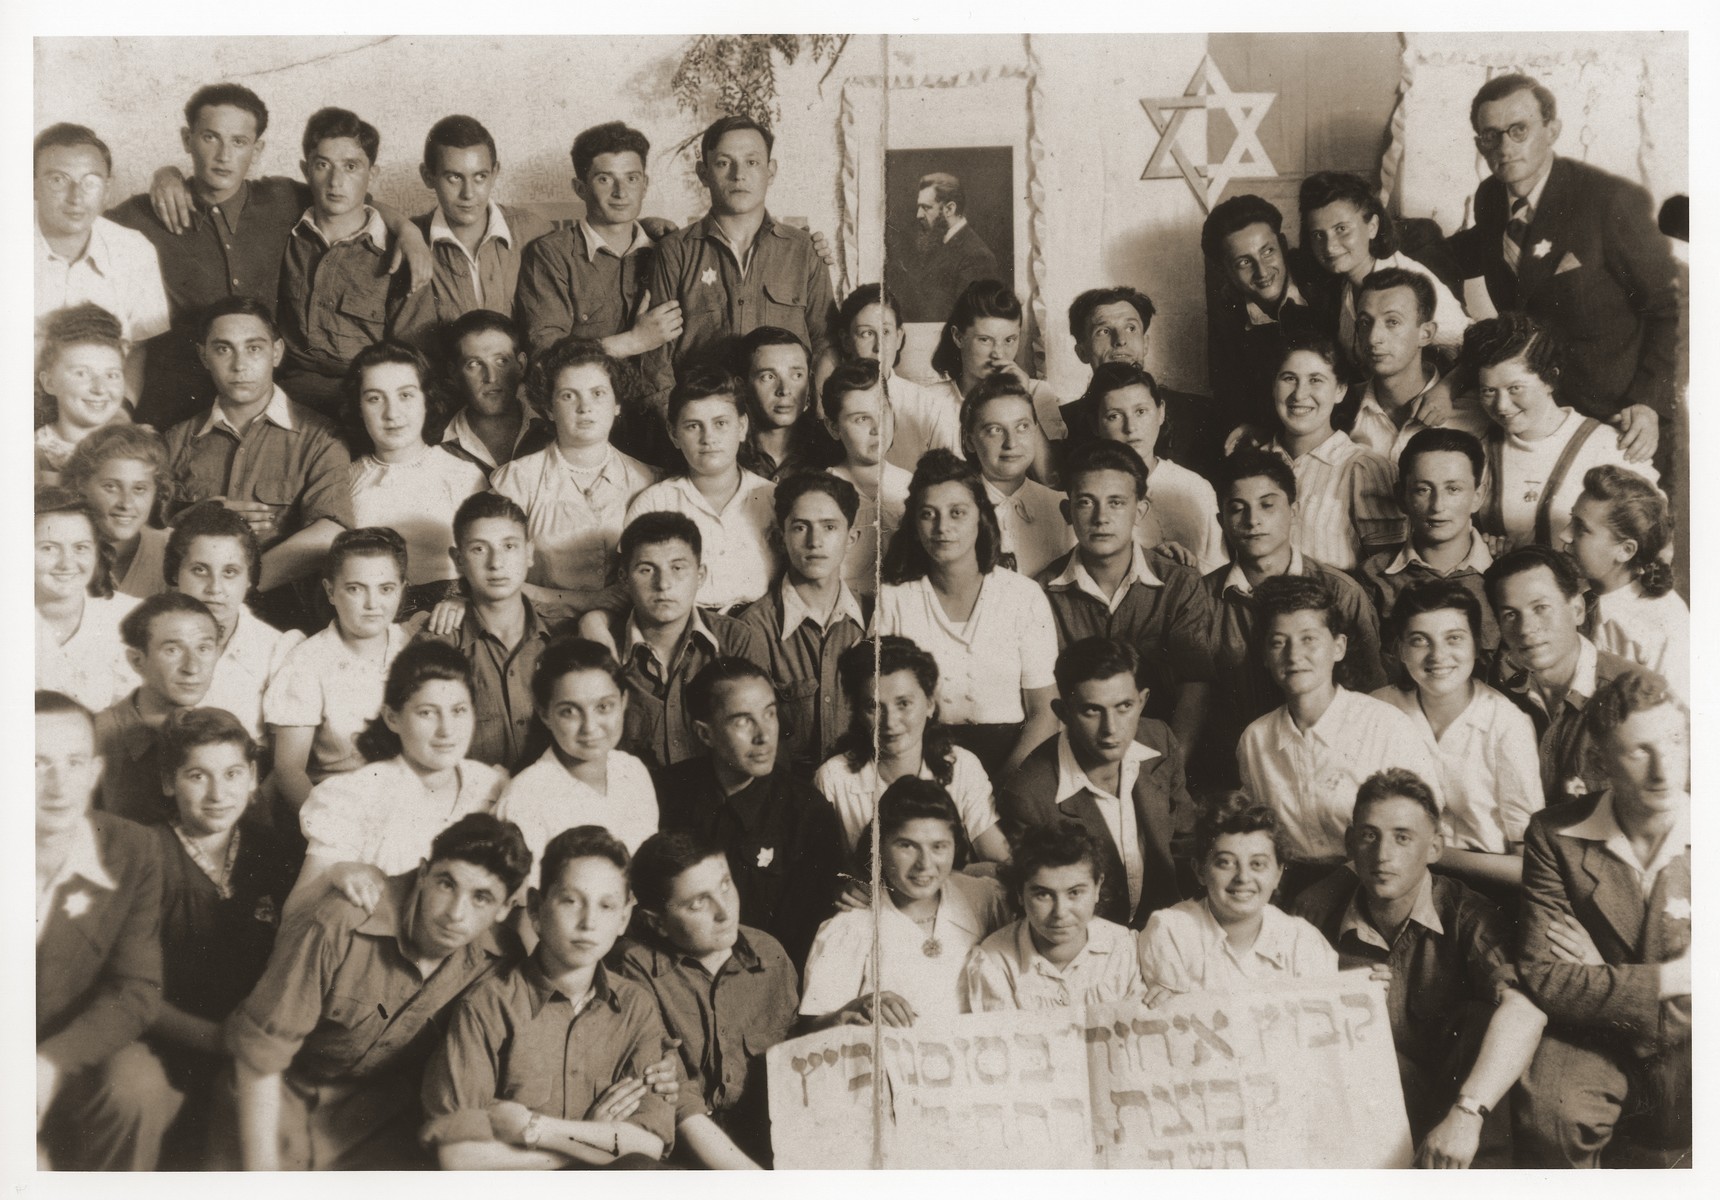 Group portrait of the members of the Kibbutz Ichud hachshara in Sosnowiec.

Szaja Aron Knobler (now Alex Knobler) is the son of Moszek and Jocheta Knobler.  He was born in 1921 in Bedzin, Poland.  Szaja had three older sisters, Ita, Esther and Leah.  In 1931 the family moved to Chorzow near the German border.  There Szaja became active in the Akiba Zionist youth movement.  In 1938 he joined the Akiba hachshara [agricultural training farm] in Bielsko and made plans to immigrate to Palestine.  His plans were thwarted, however, by the start of World War II.  In the first months of the war Szaja fled to the Soviet sector of Poland, where he explored possible exit routes to Palestine via Romania for the nascent Zionist underground.  During a visit home in 1940 Szaja was caught up in the forced resettlement of his family to the Sosnowiec ghetto.  From Sosnowiec Szaja was deported to the Blechhammer labor camp, where he remained until the camp was evacuated in January 1945.  During the forced march out of the camp Szaja ran away with two friends.  German guards shot and killed his friends but Szaja escaped.  Posing as a Polish laborer, Szaja found refuge with a German farmer in Gleiwitz until liberation.  After the war Szaja, who was the sole survivor of his immediate family, took a leading role in the setting up of Zionist collectives in Poland.  He also was active in the Bricha and Aliyah Bet [illegal immigration to Palestine] movement.  This activity led to his arrest in Sosnowiec by the NKVD.  Following his release from prison, Szaja left Poland for Germany.  During the summer of 1945 Szaja organized Zionist activities at the Foehrenwald displaced persons camp.  In October he moved on to the Bergen-Belsen DP camp, where he joined a group of 400 would-be immigrants to Palestine.  The group sailed aboard the Tel Hai from Marseilles in March 1946.  When the ship reached Palestine, it was intercepted by the British and its passengers interned for three weeks in Athlit.  Following his release Szaja settled in Kibbutz Masada, but by December 1946 he was back in Germany.  Serving as an emissary for NOHAM (Noar Halutzi Meuchad), a Zionist youth umbrella group, Szaja distributed immigration certificates and organized Youth Aliyah groups in the DP camps.  While working at the Belsen DP camp Szaja met Pola Blicblum, a survivor from Lodz.  They were married in the Landsberg DP camp on July 30, 1947.  Soon after they settled in Palestine.